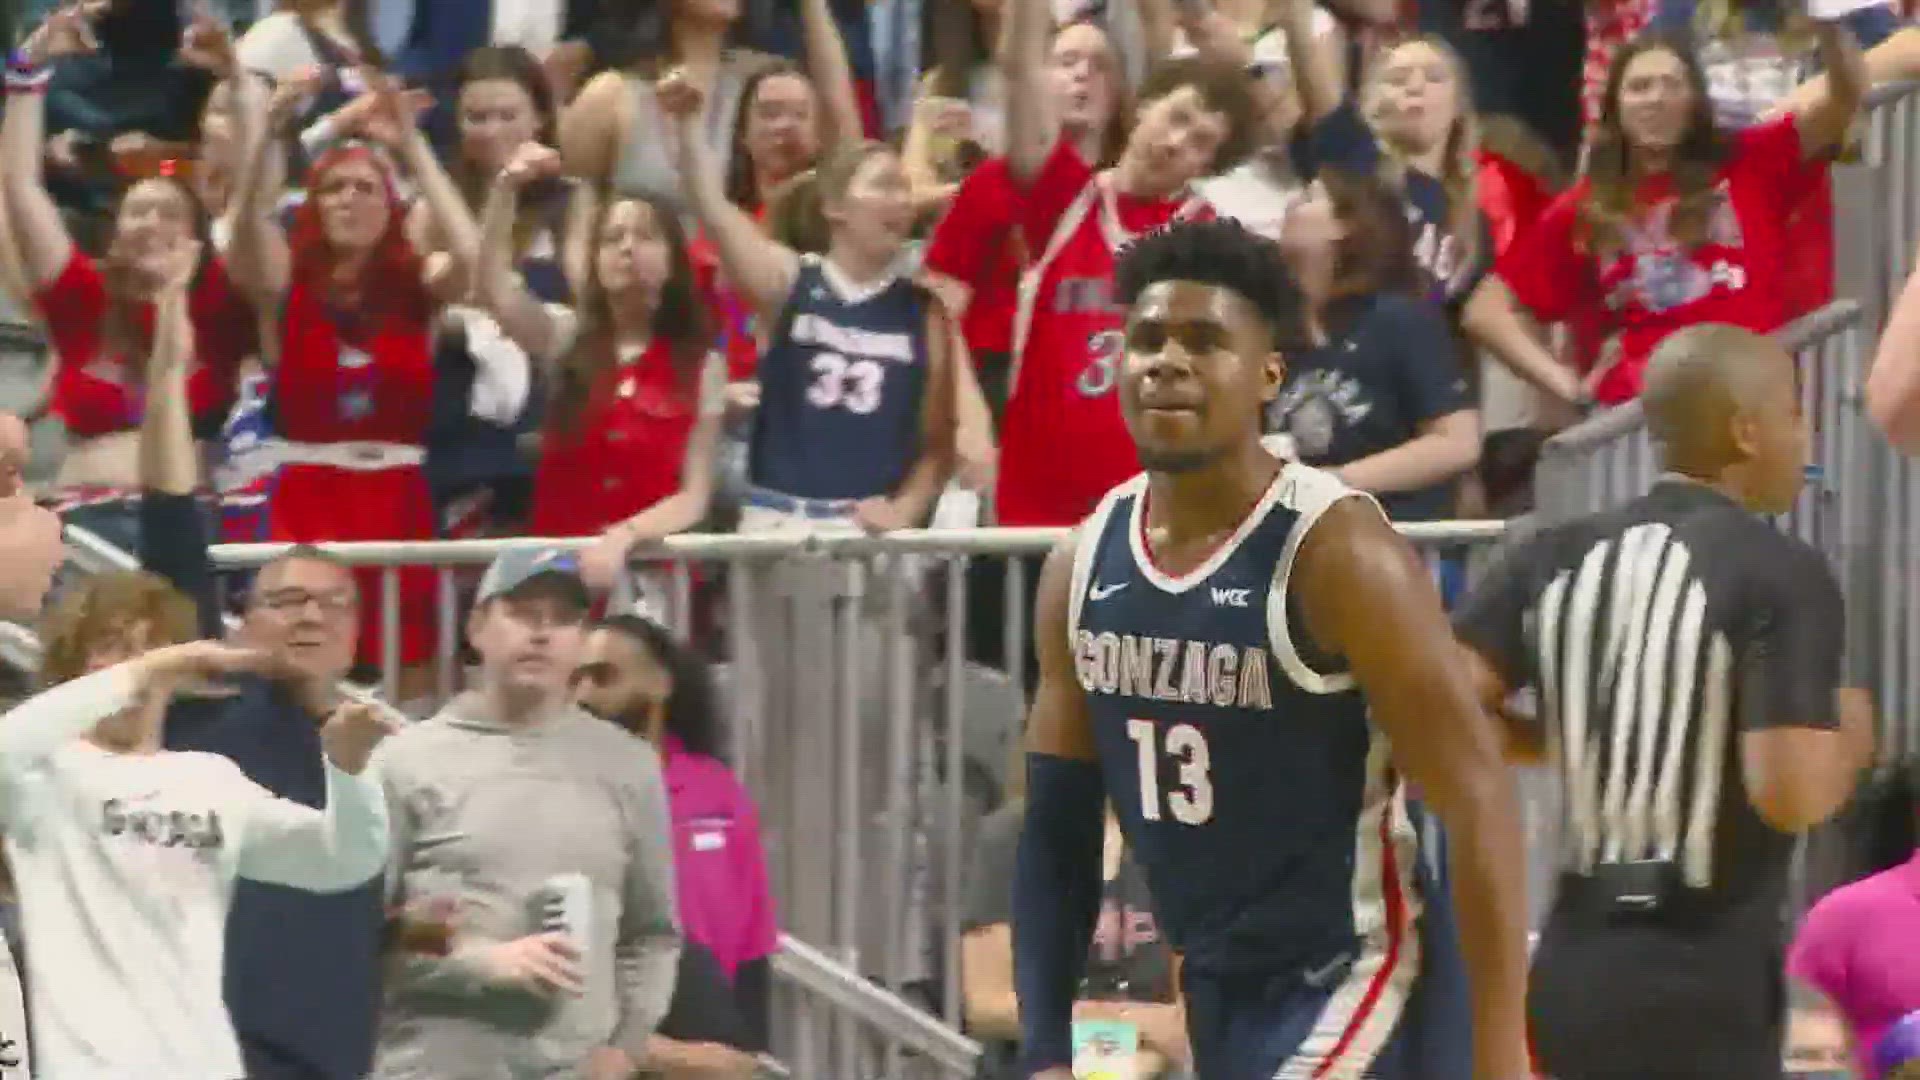 Gonzaga may be losing another one of their top guards as Malachi Smith said he is planning to move on to the NBA.